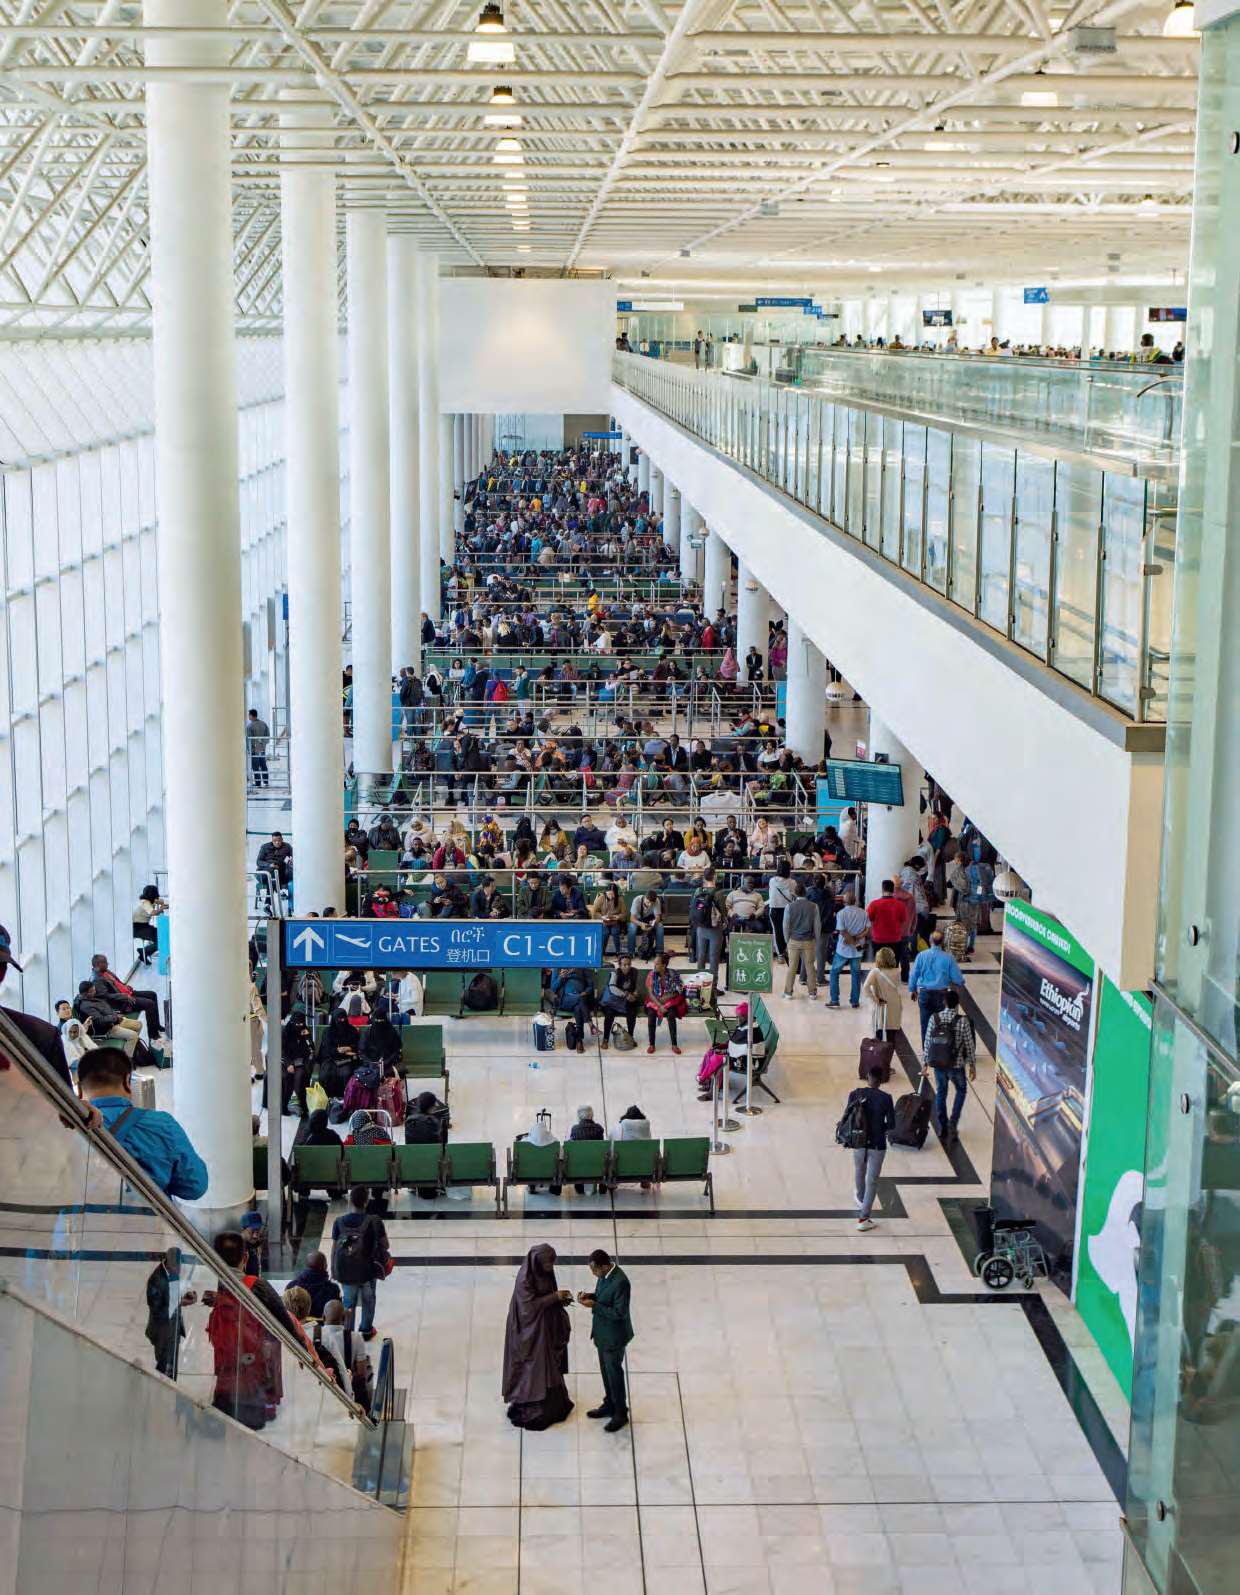 Bole Airport in Addis Ababa has a capacity of 22 million passengers per year since the construction of Terminal 2.ALAMY